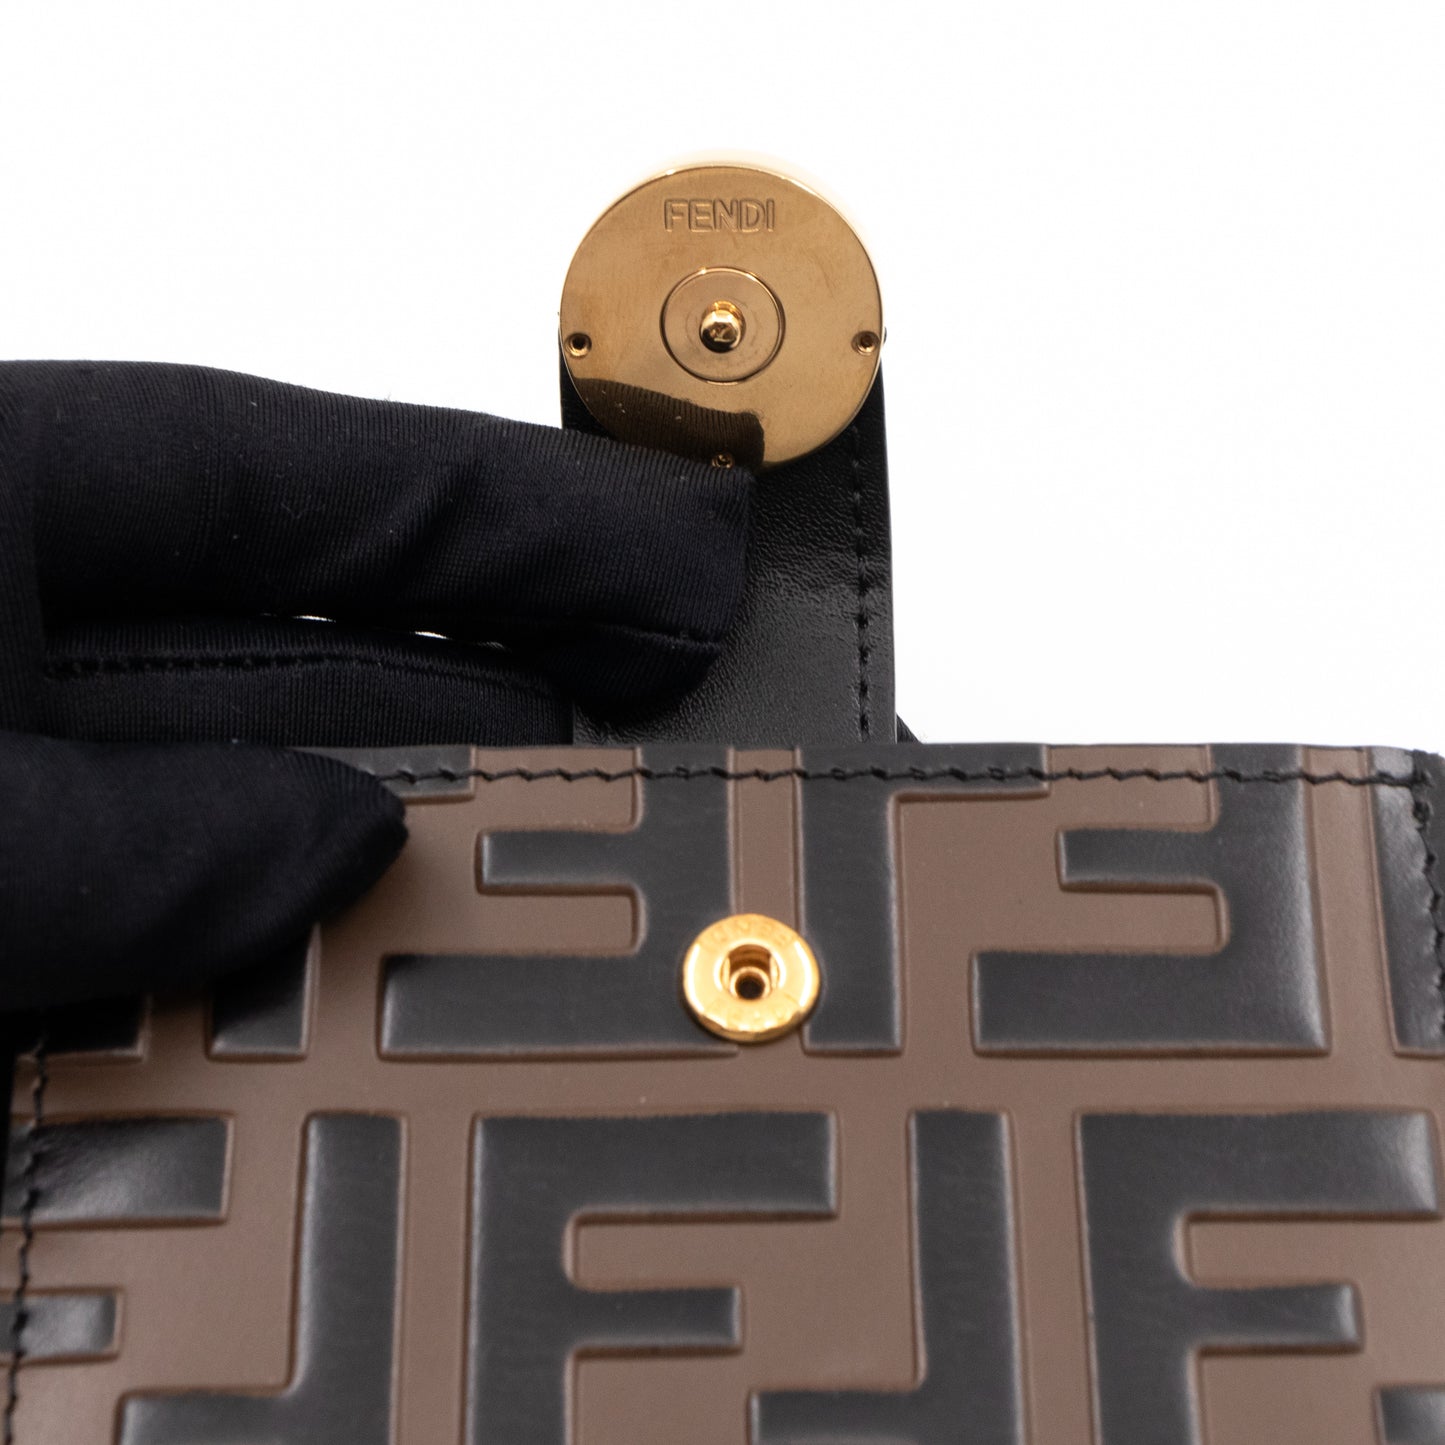 Expandable Card Holder FF Brown Leather